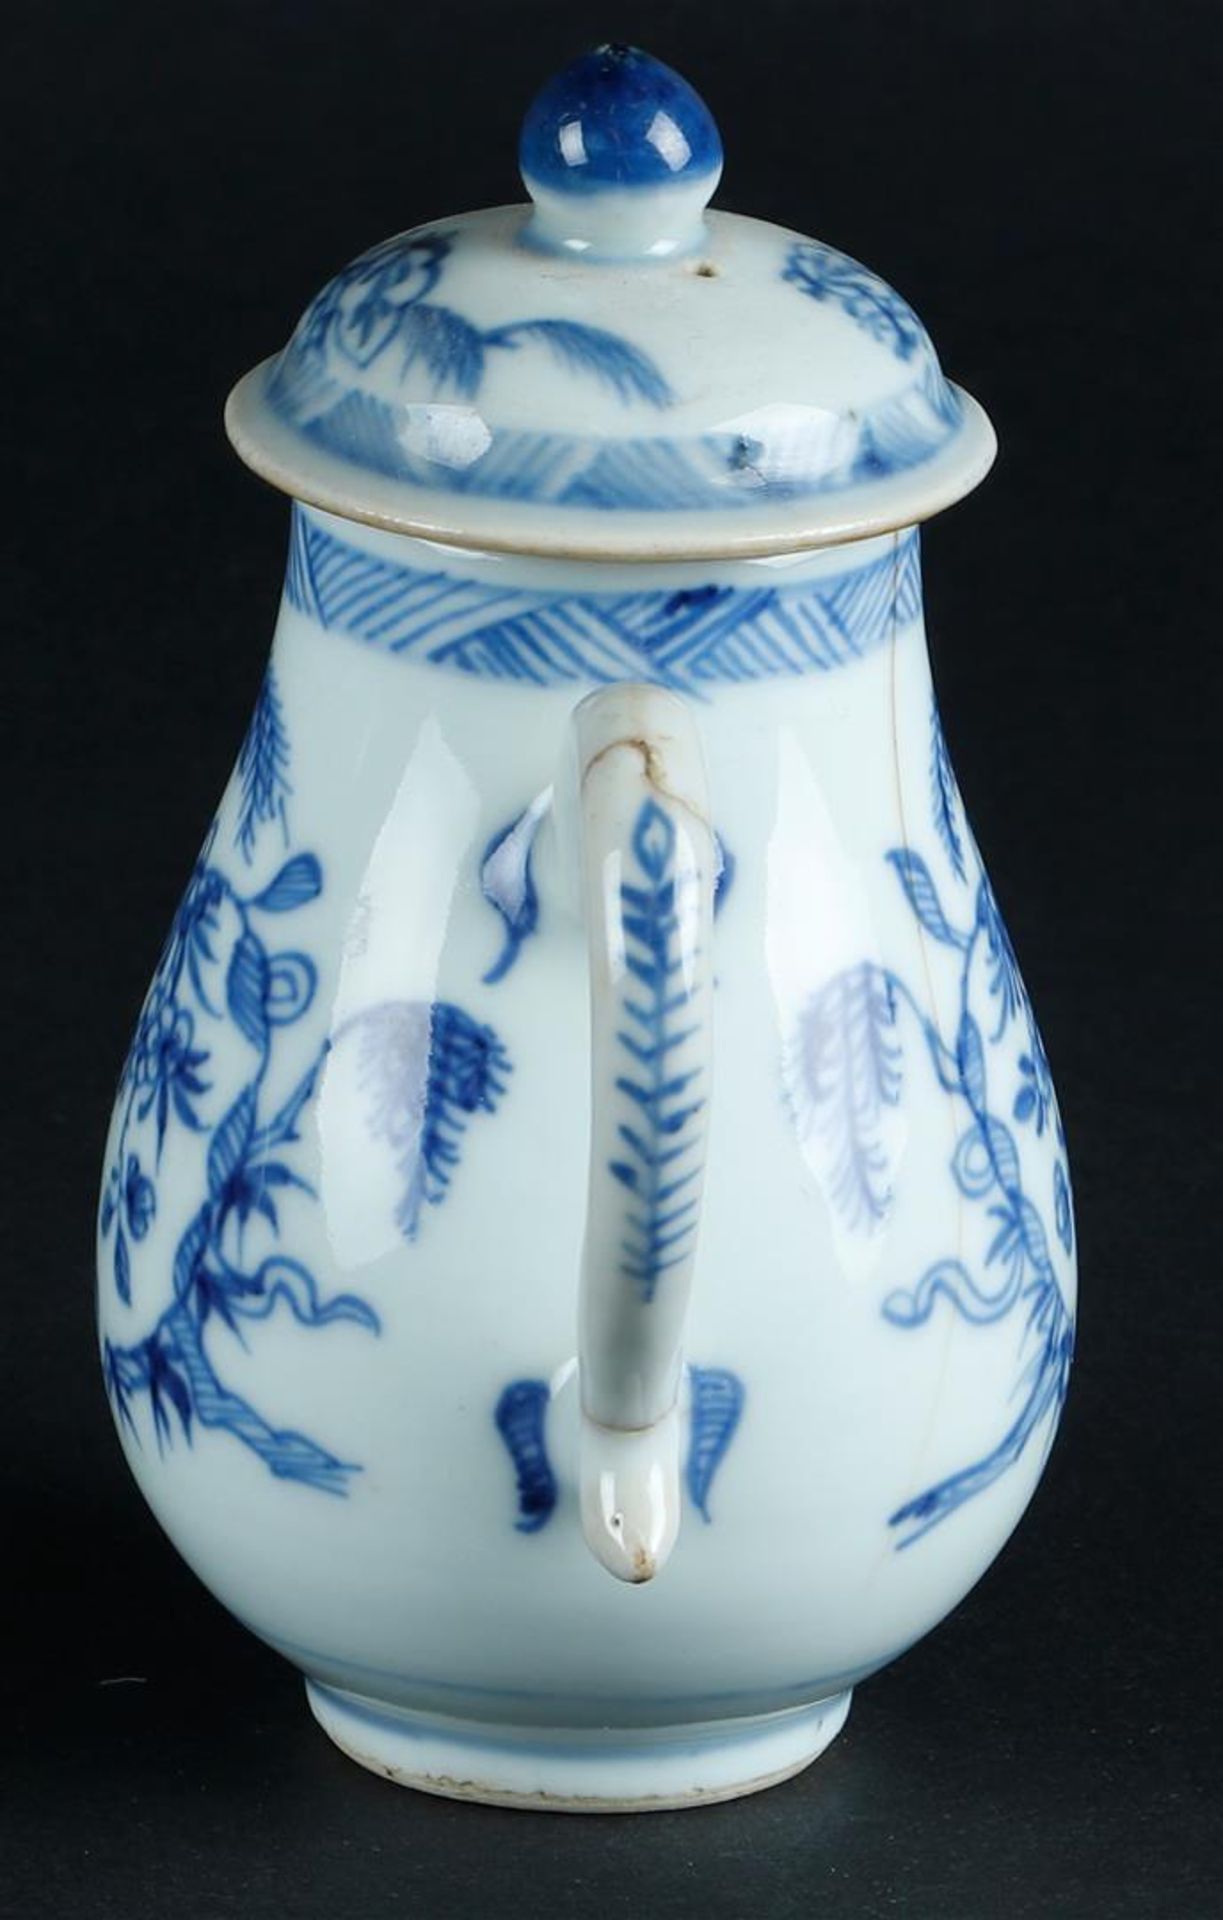 A porcelain milk jug with weeping willow (willow) decor. China, Qianlong. - Image 4 of 6